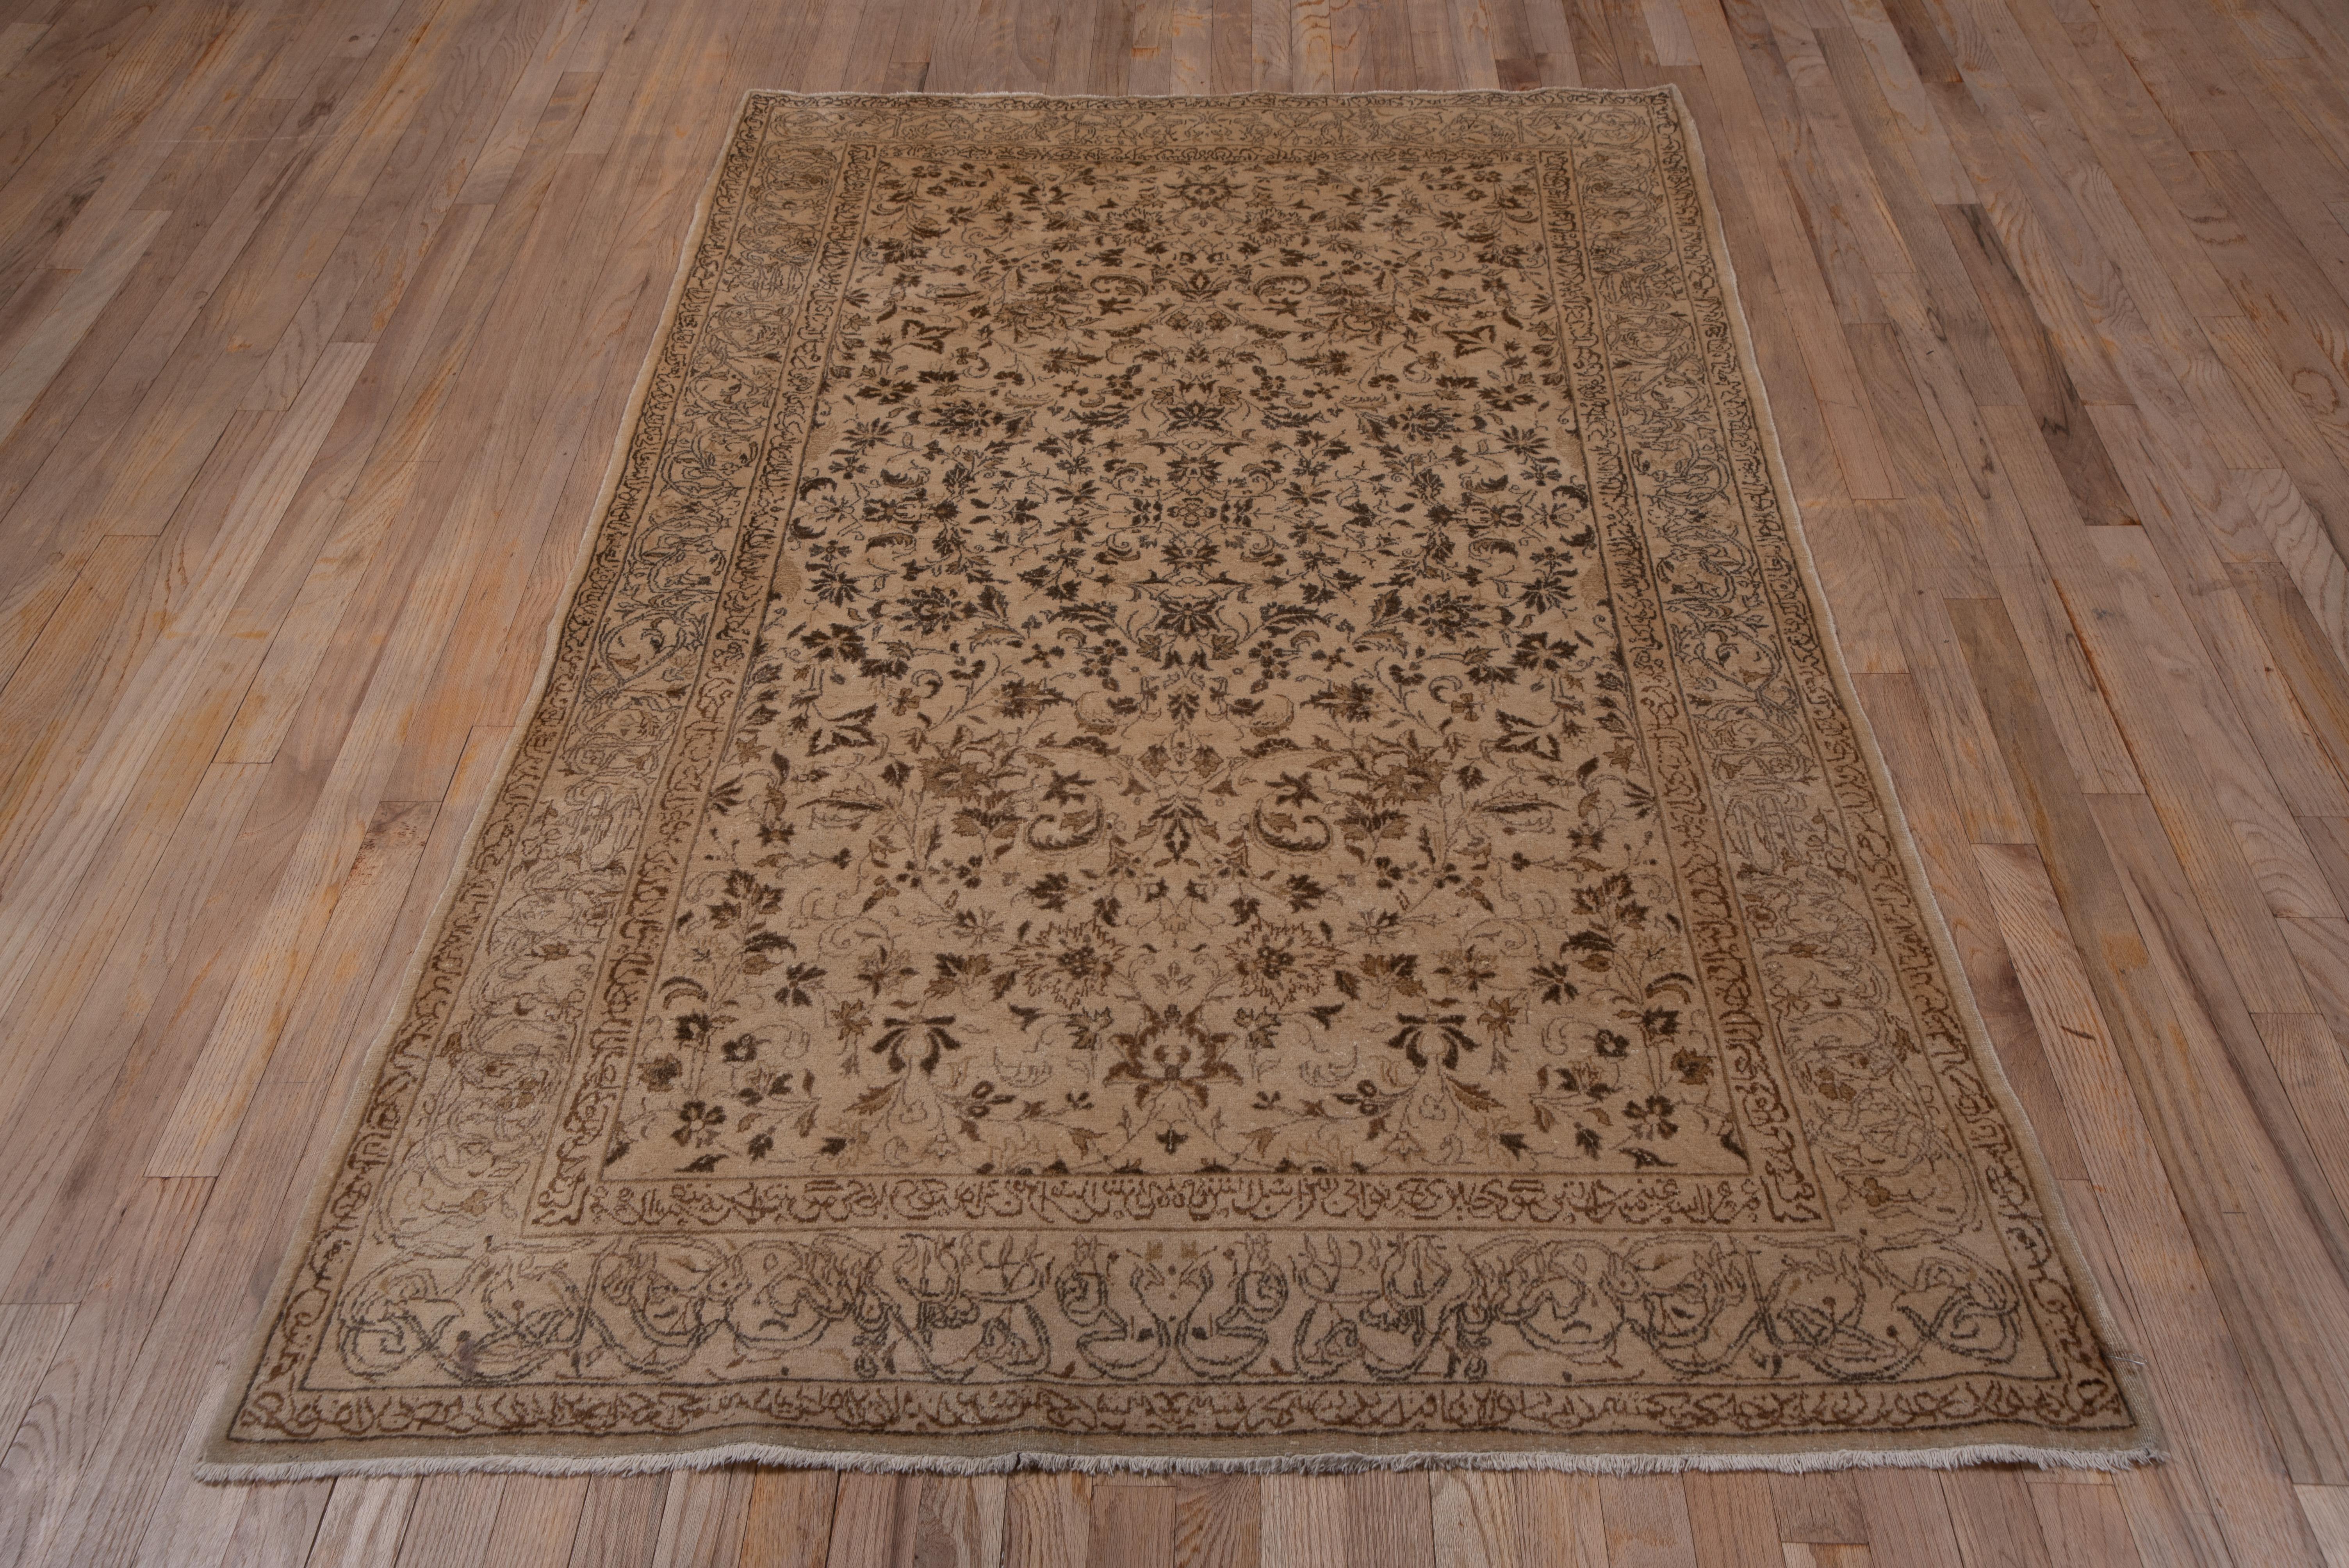 Hand-Knotted Mid-20th Century Persian Kashan Rug, Tan Field, Brown Accents, circa 1950s